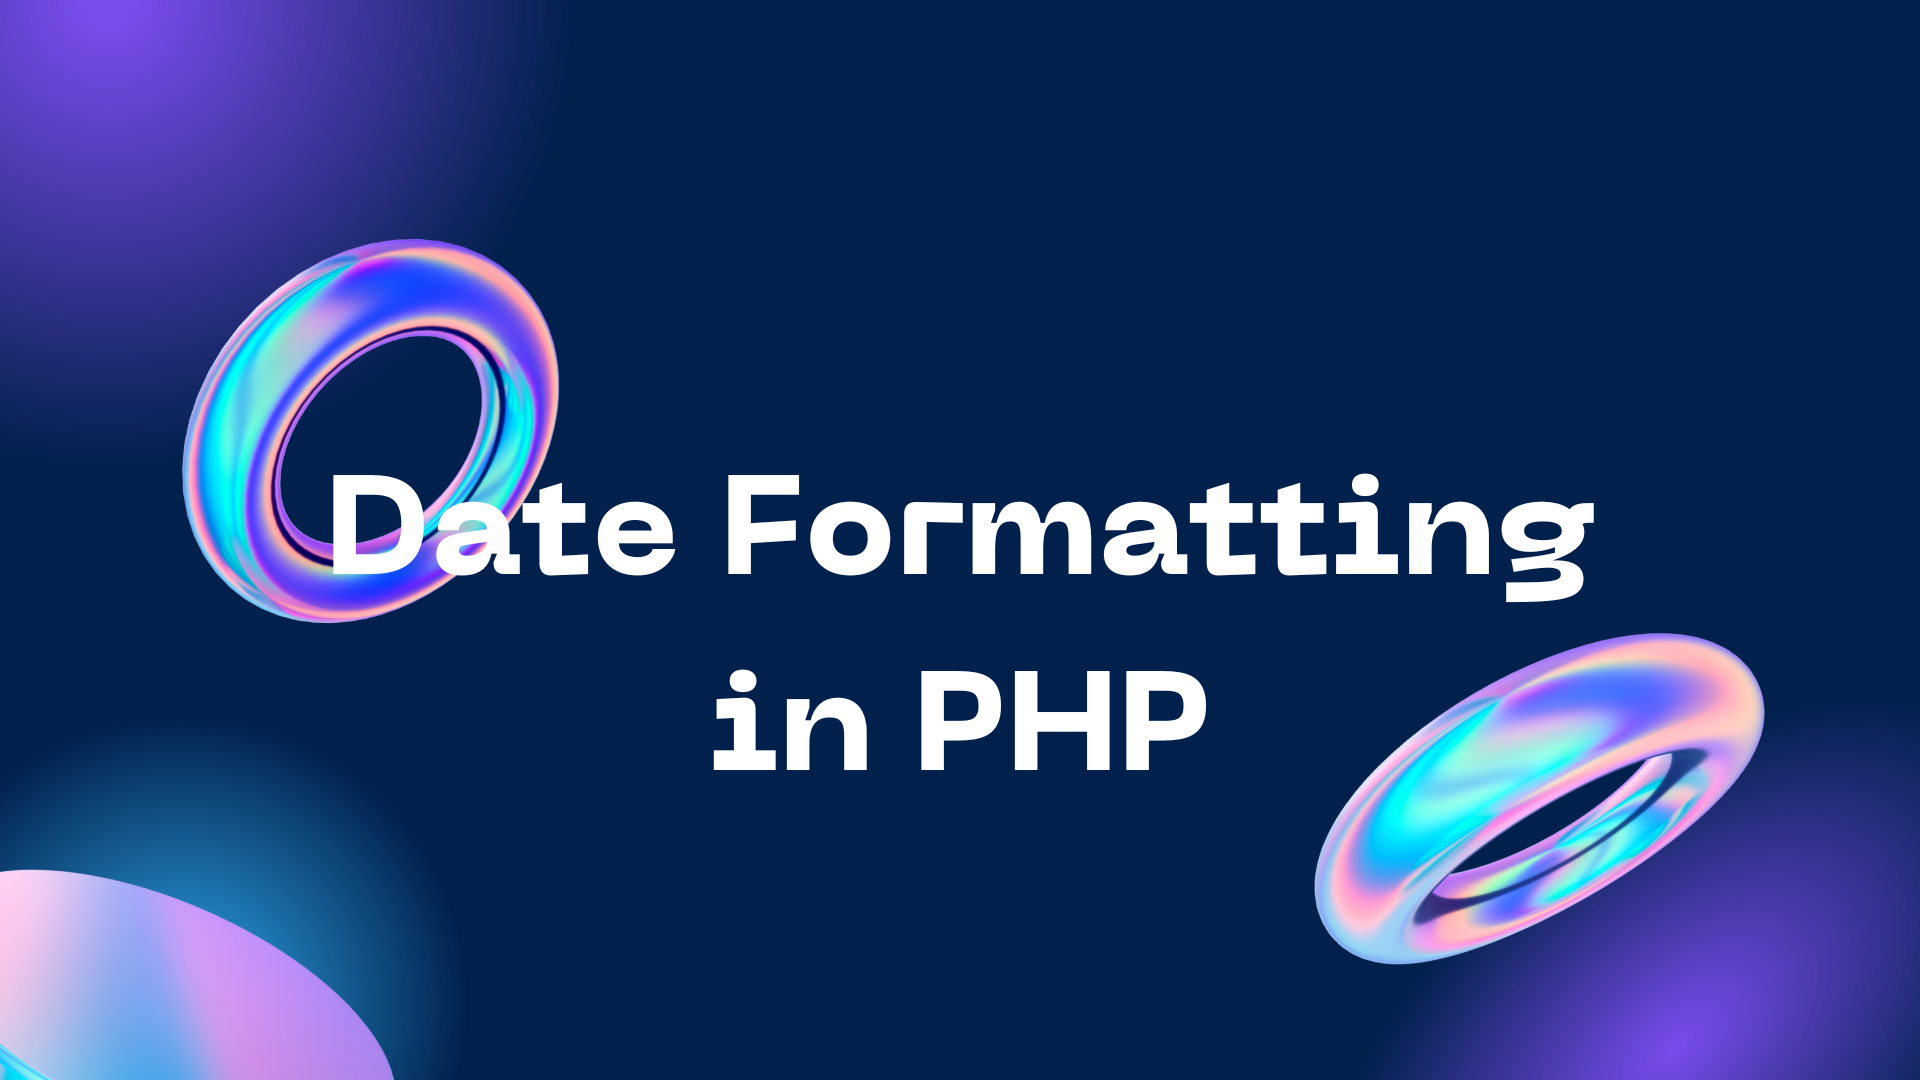 Date Formatting in PHP